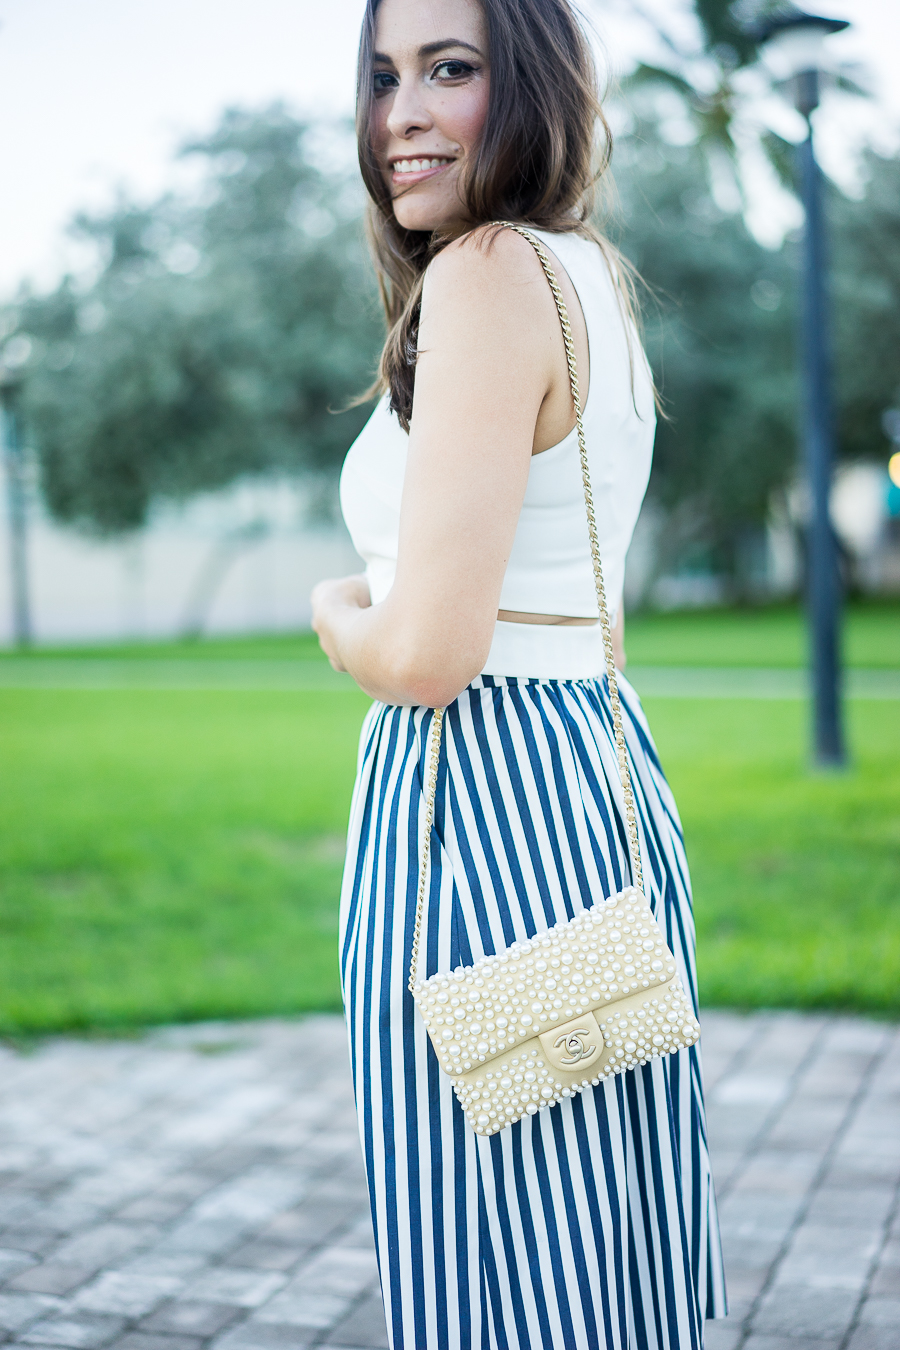 White crop top, striped skirt, Chanel pearl bag